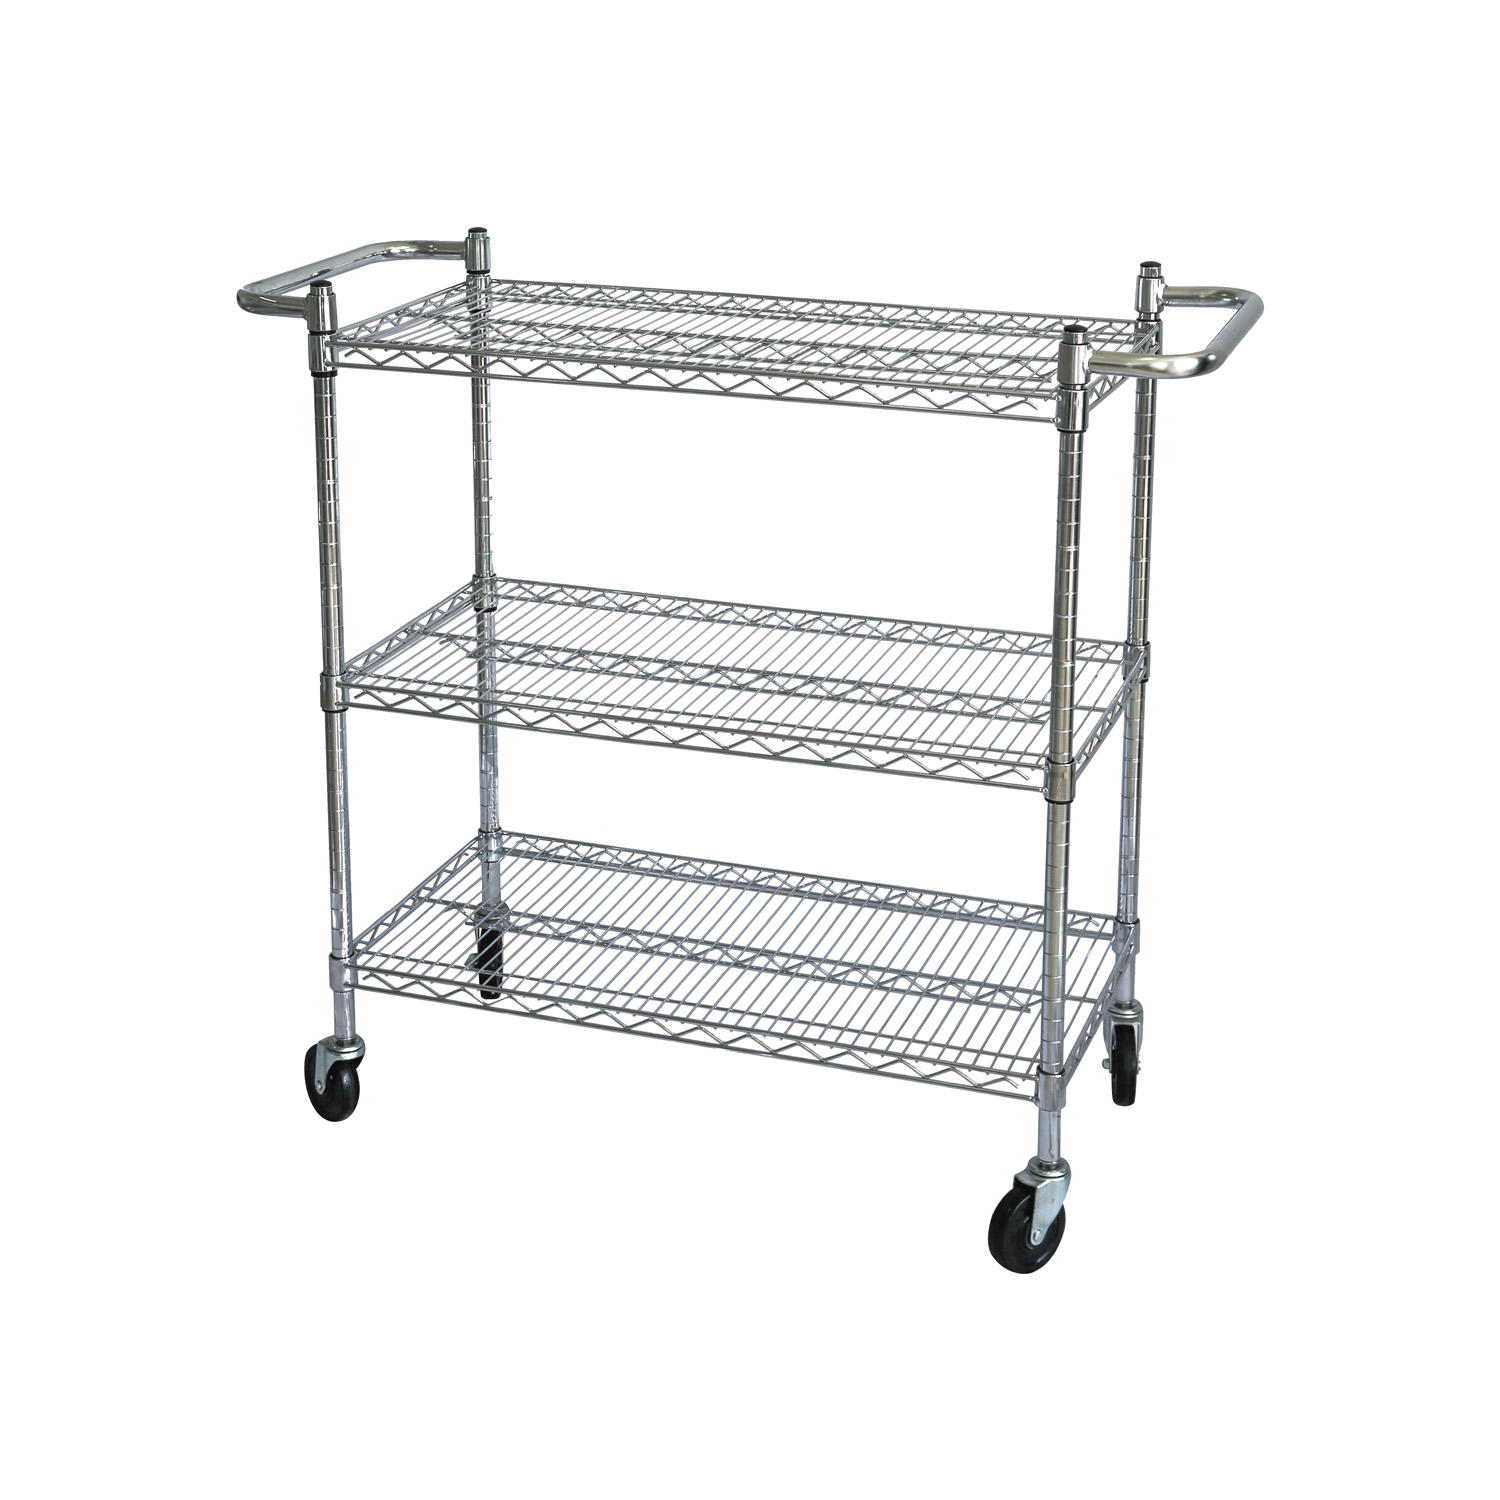 CAC China ACCW-1836S Chrome-Plated 3-Tier Wire Utility Cart 18" x 36" x 42" H